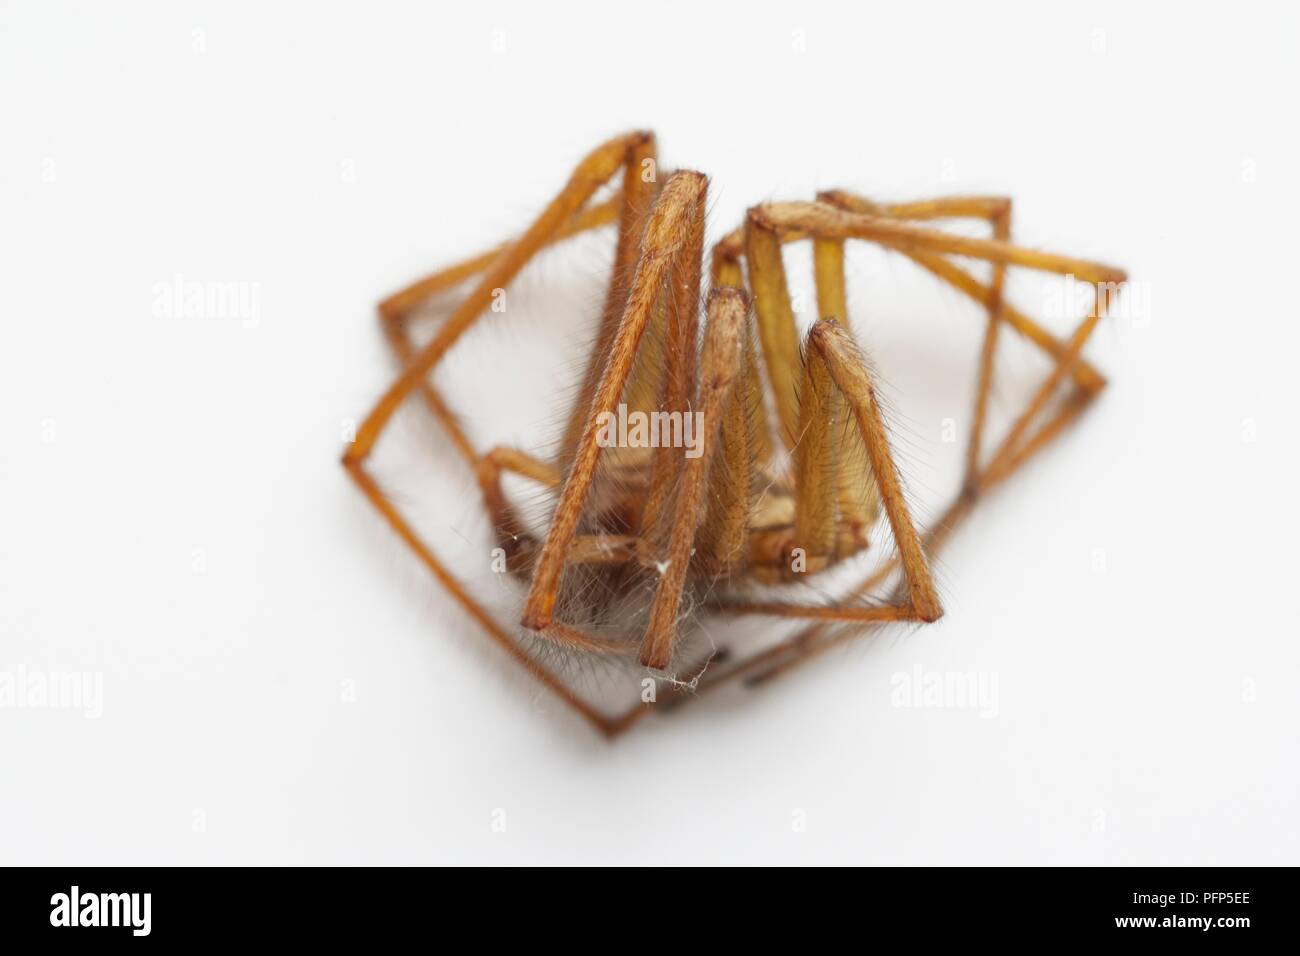 Dead spider curled up Stock Photo